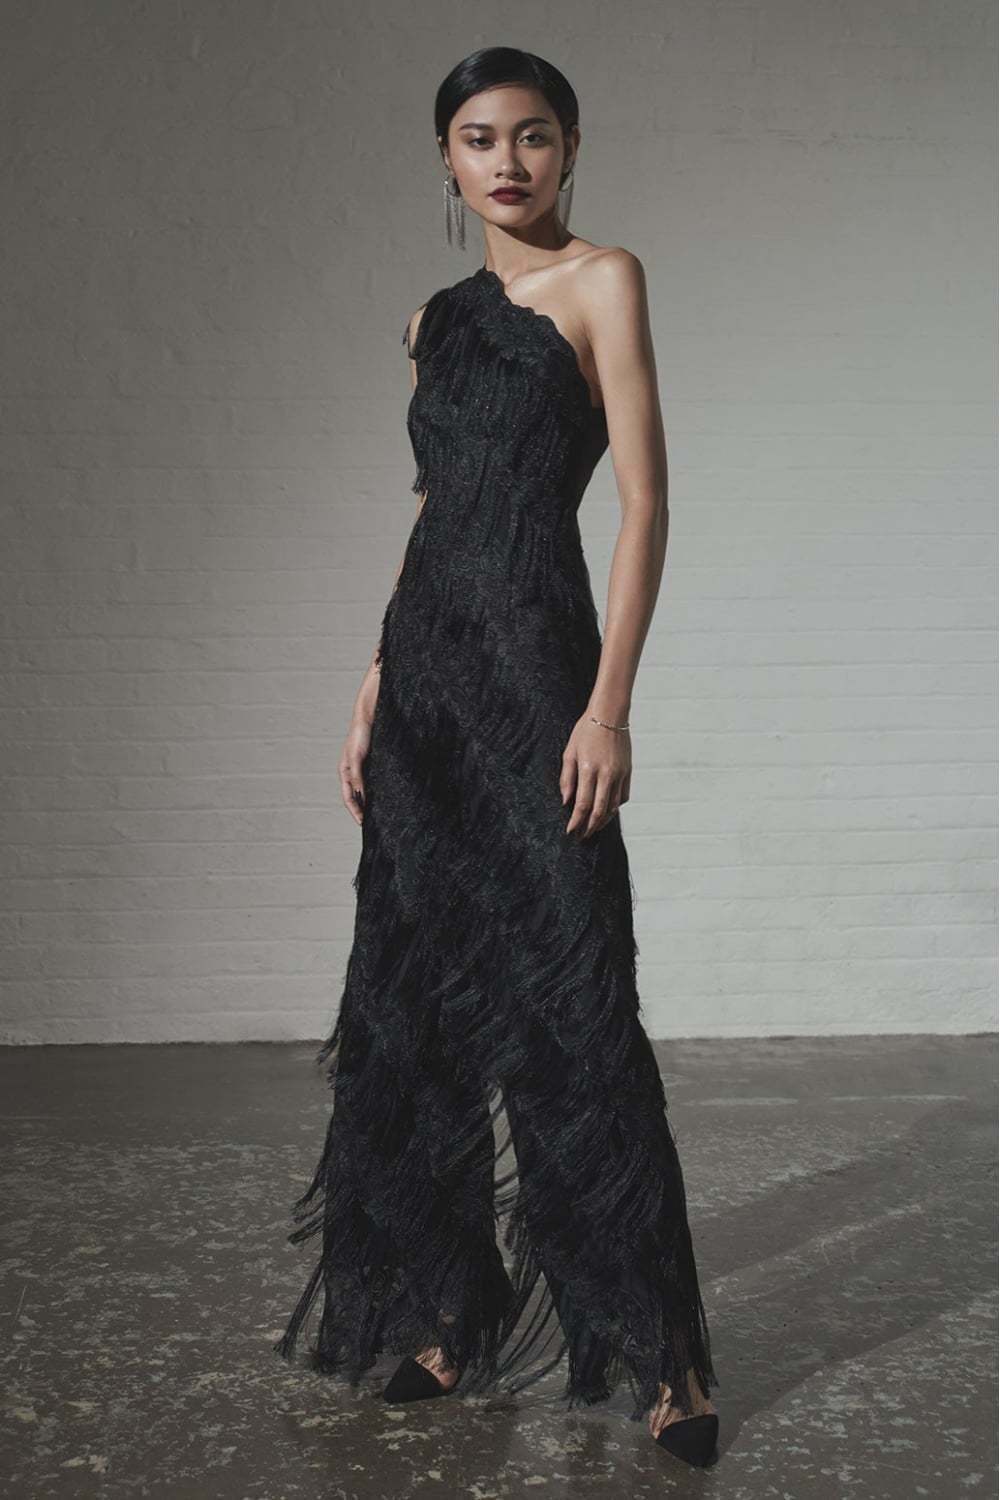 The Black Fringed Lace Jumpsuit - Front Glamour View